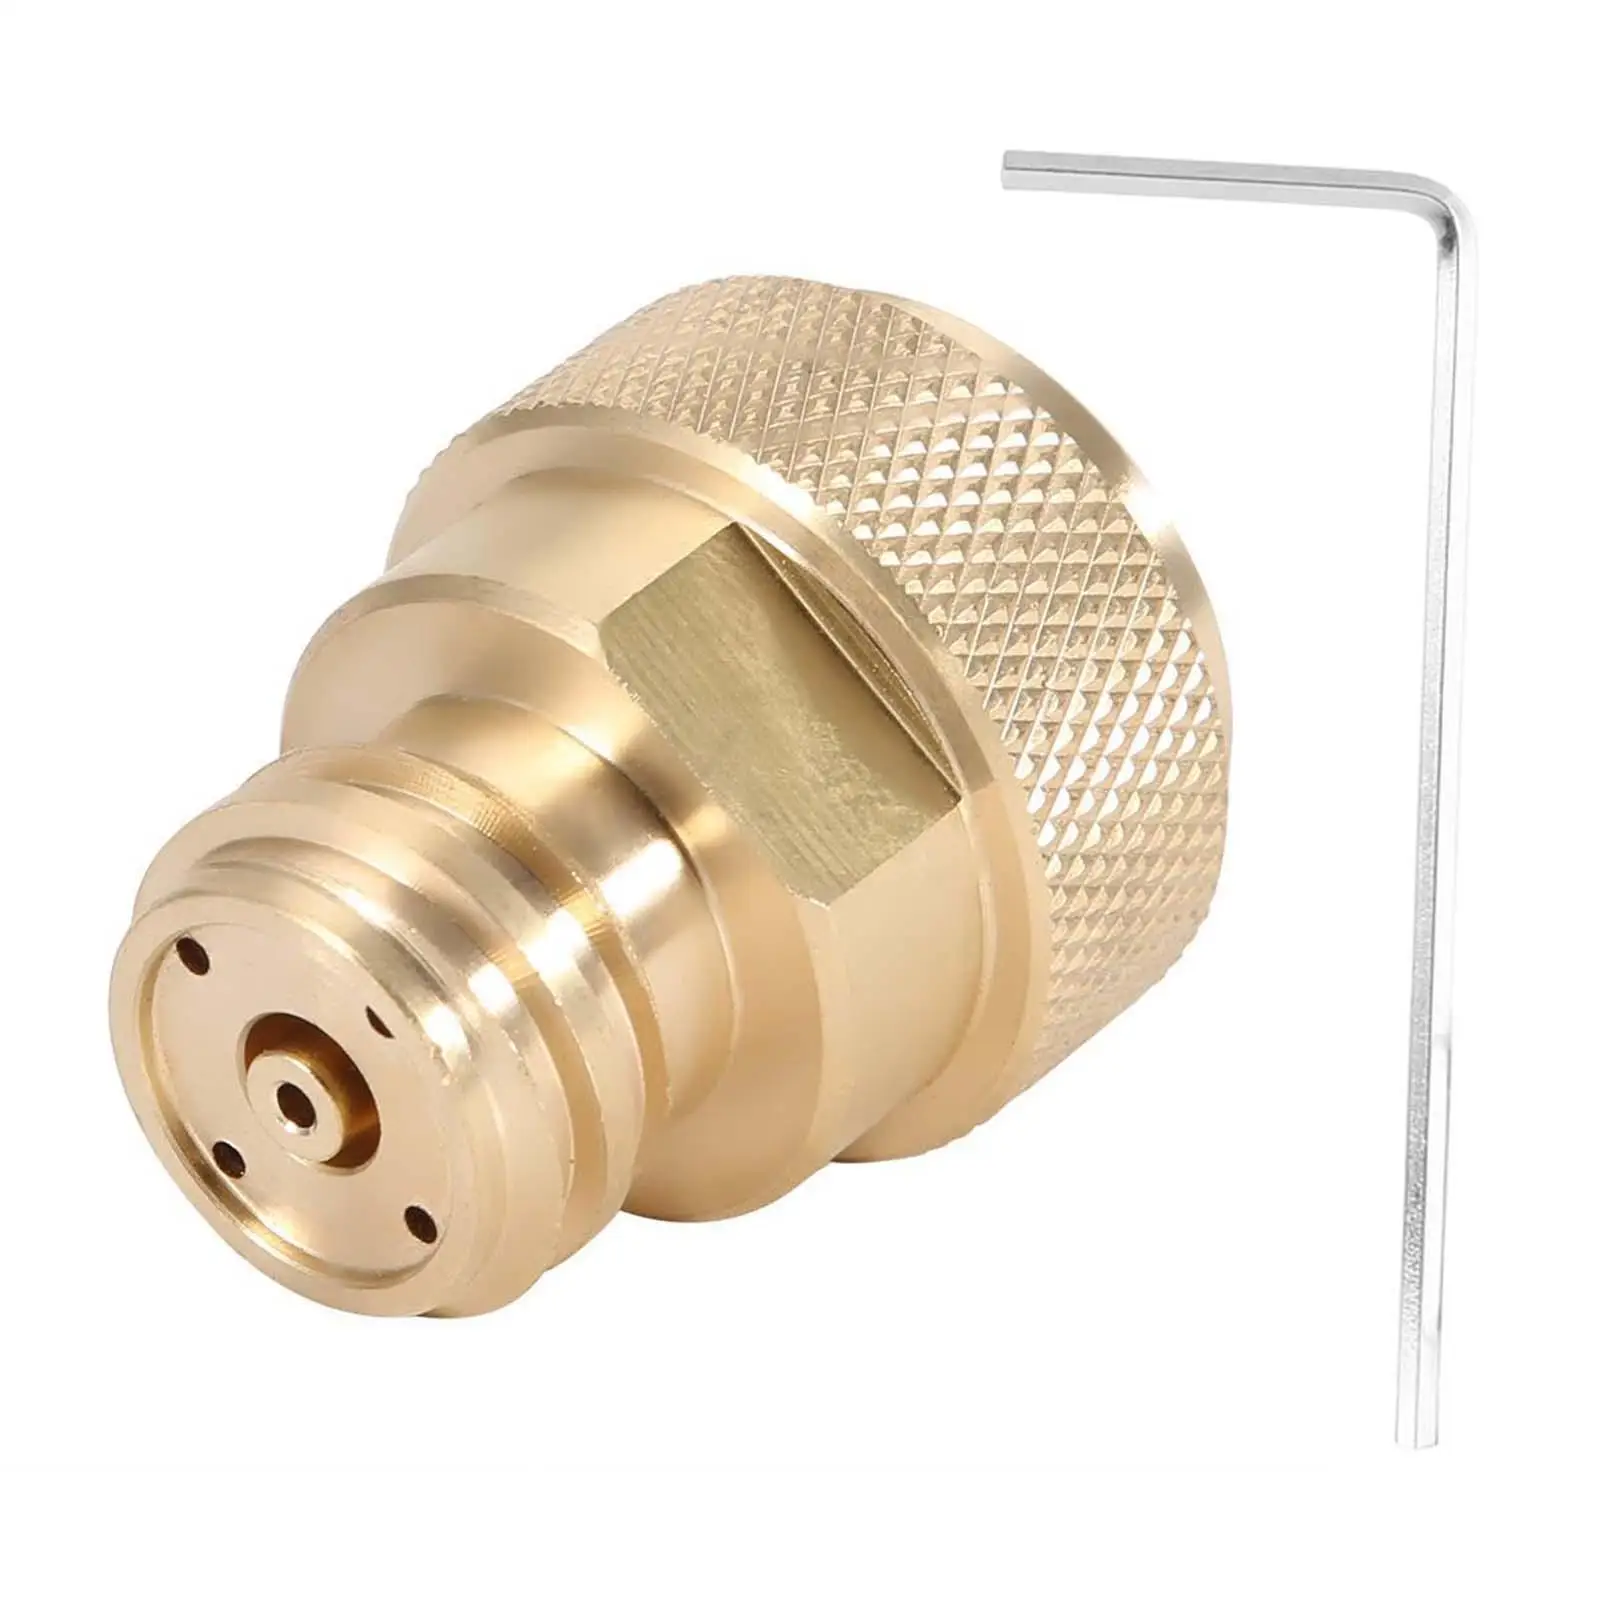 Brass CO2 Converter Adapter Tank Canister Conversion for Soda Machine